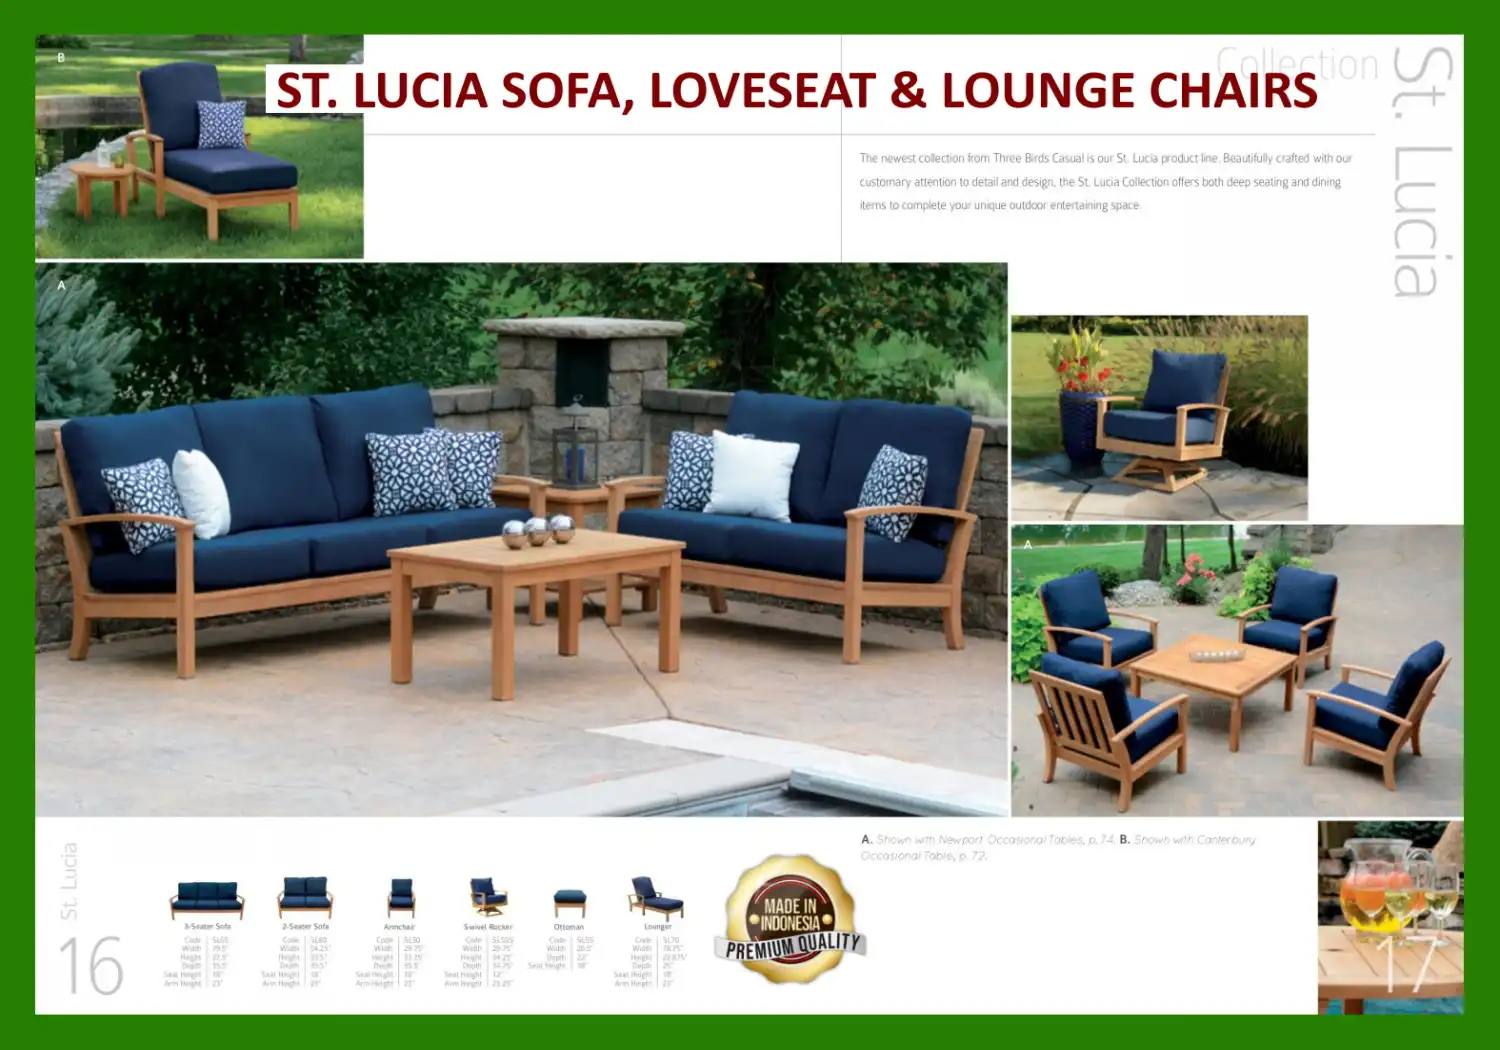 ST. LUCIA SOFA, LOVESEAT & LOUNGE CHAIRS